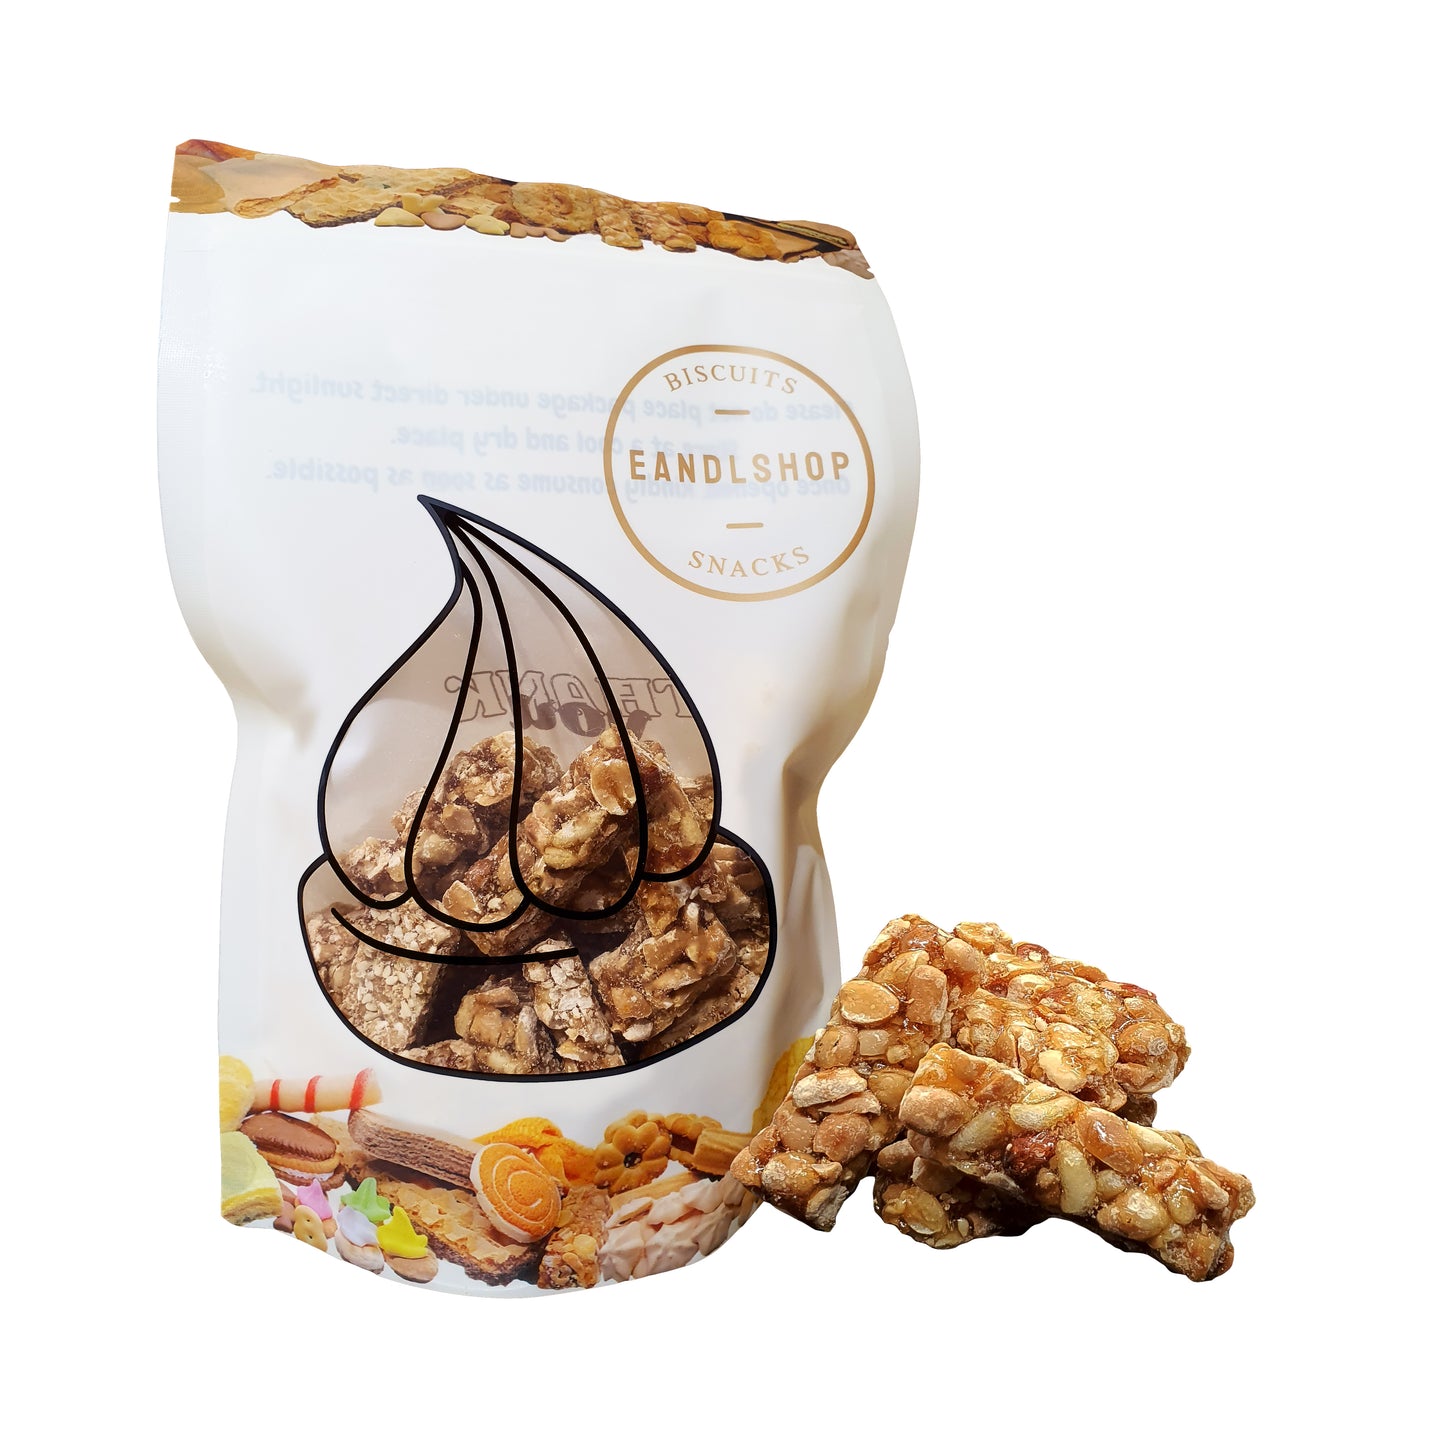 Peanut Candy. Old-school biscuits, modern snacks (chips, crackers), cakes, gummies, plums, dried fruits, nuts, herbal tea – available at www.EANDLSHOP.com